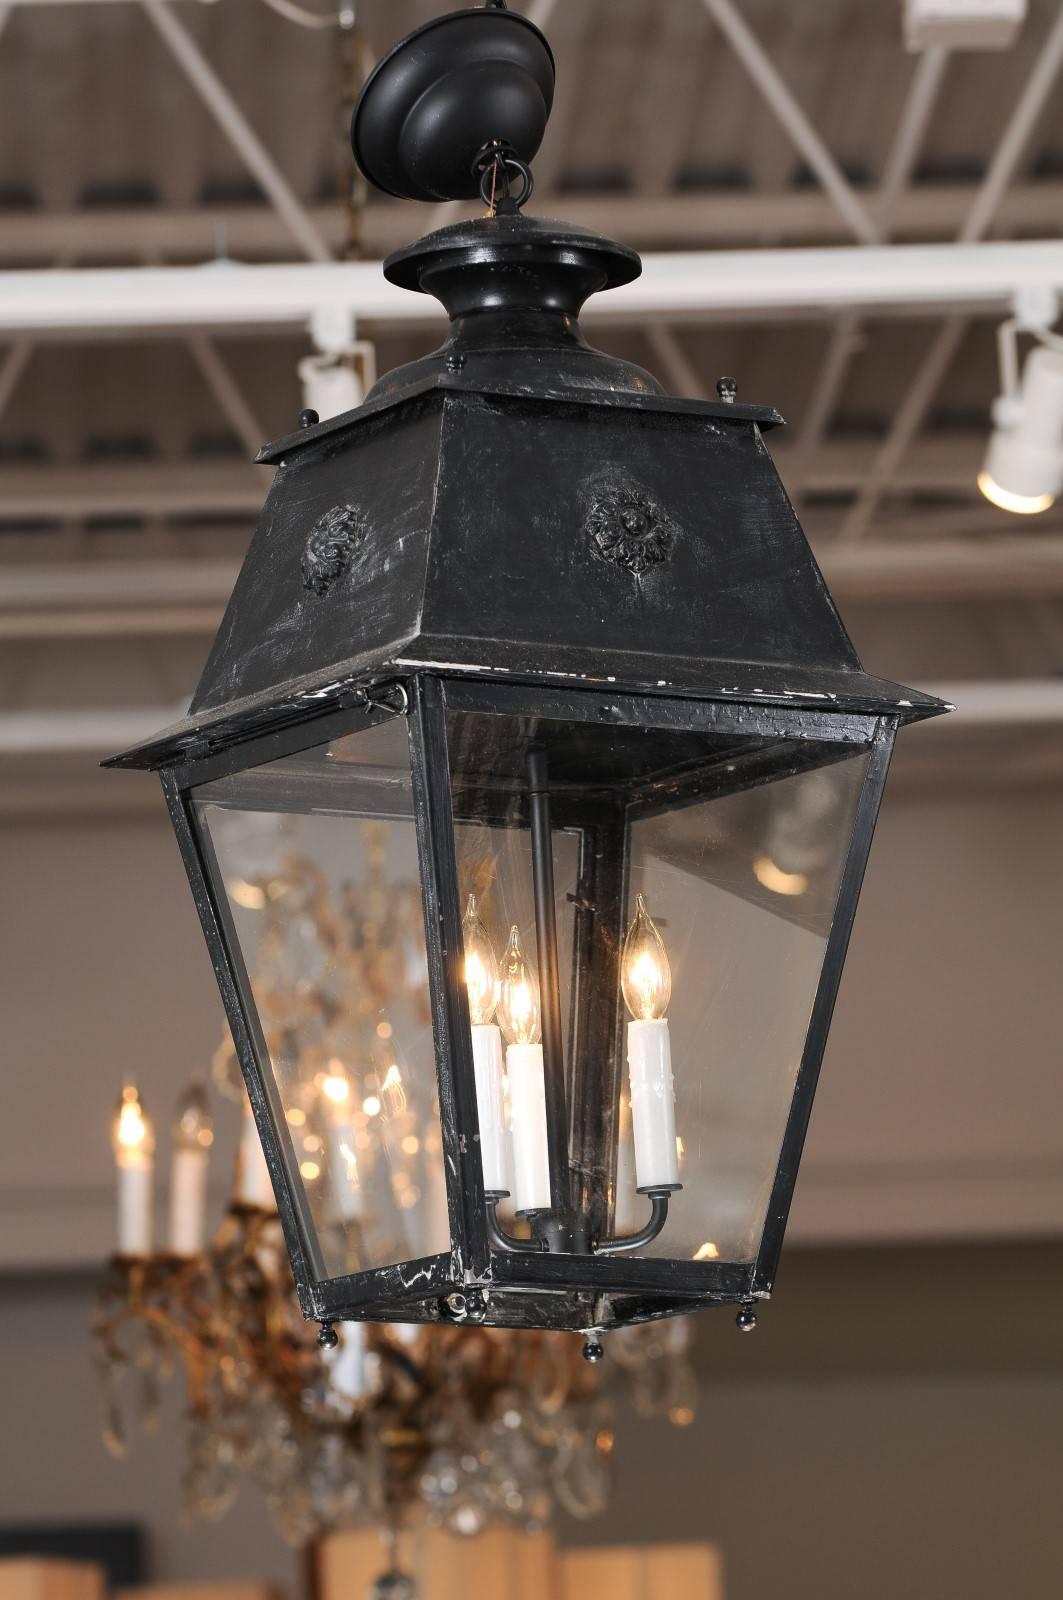 A pair of antique French black iron three-light lanterns from the late 19th century with rosette motifs and glass panels. From the south of France come these painted antique lanterns, both of which feature sleek, black metal framework, four sides of